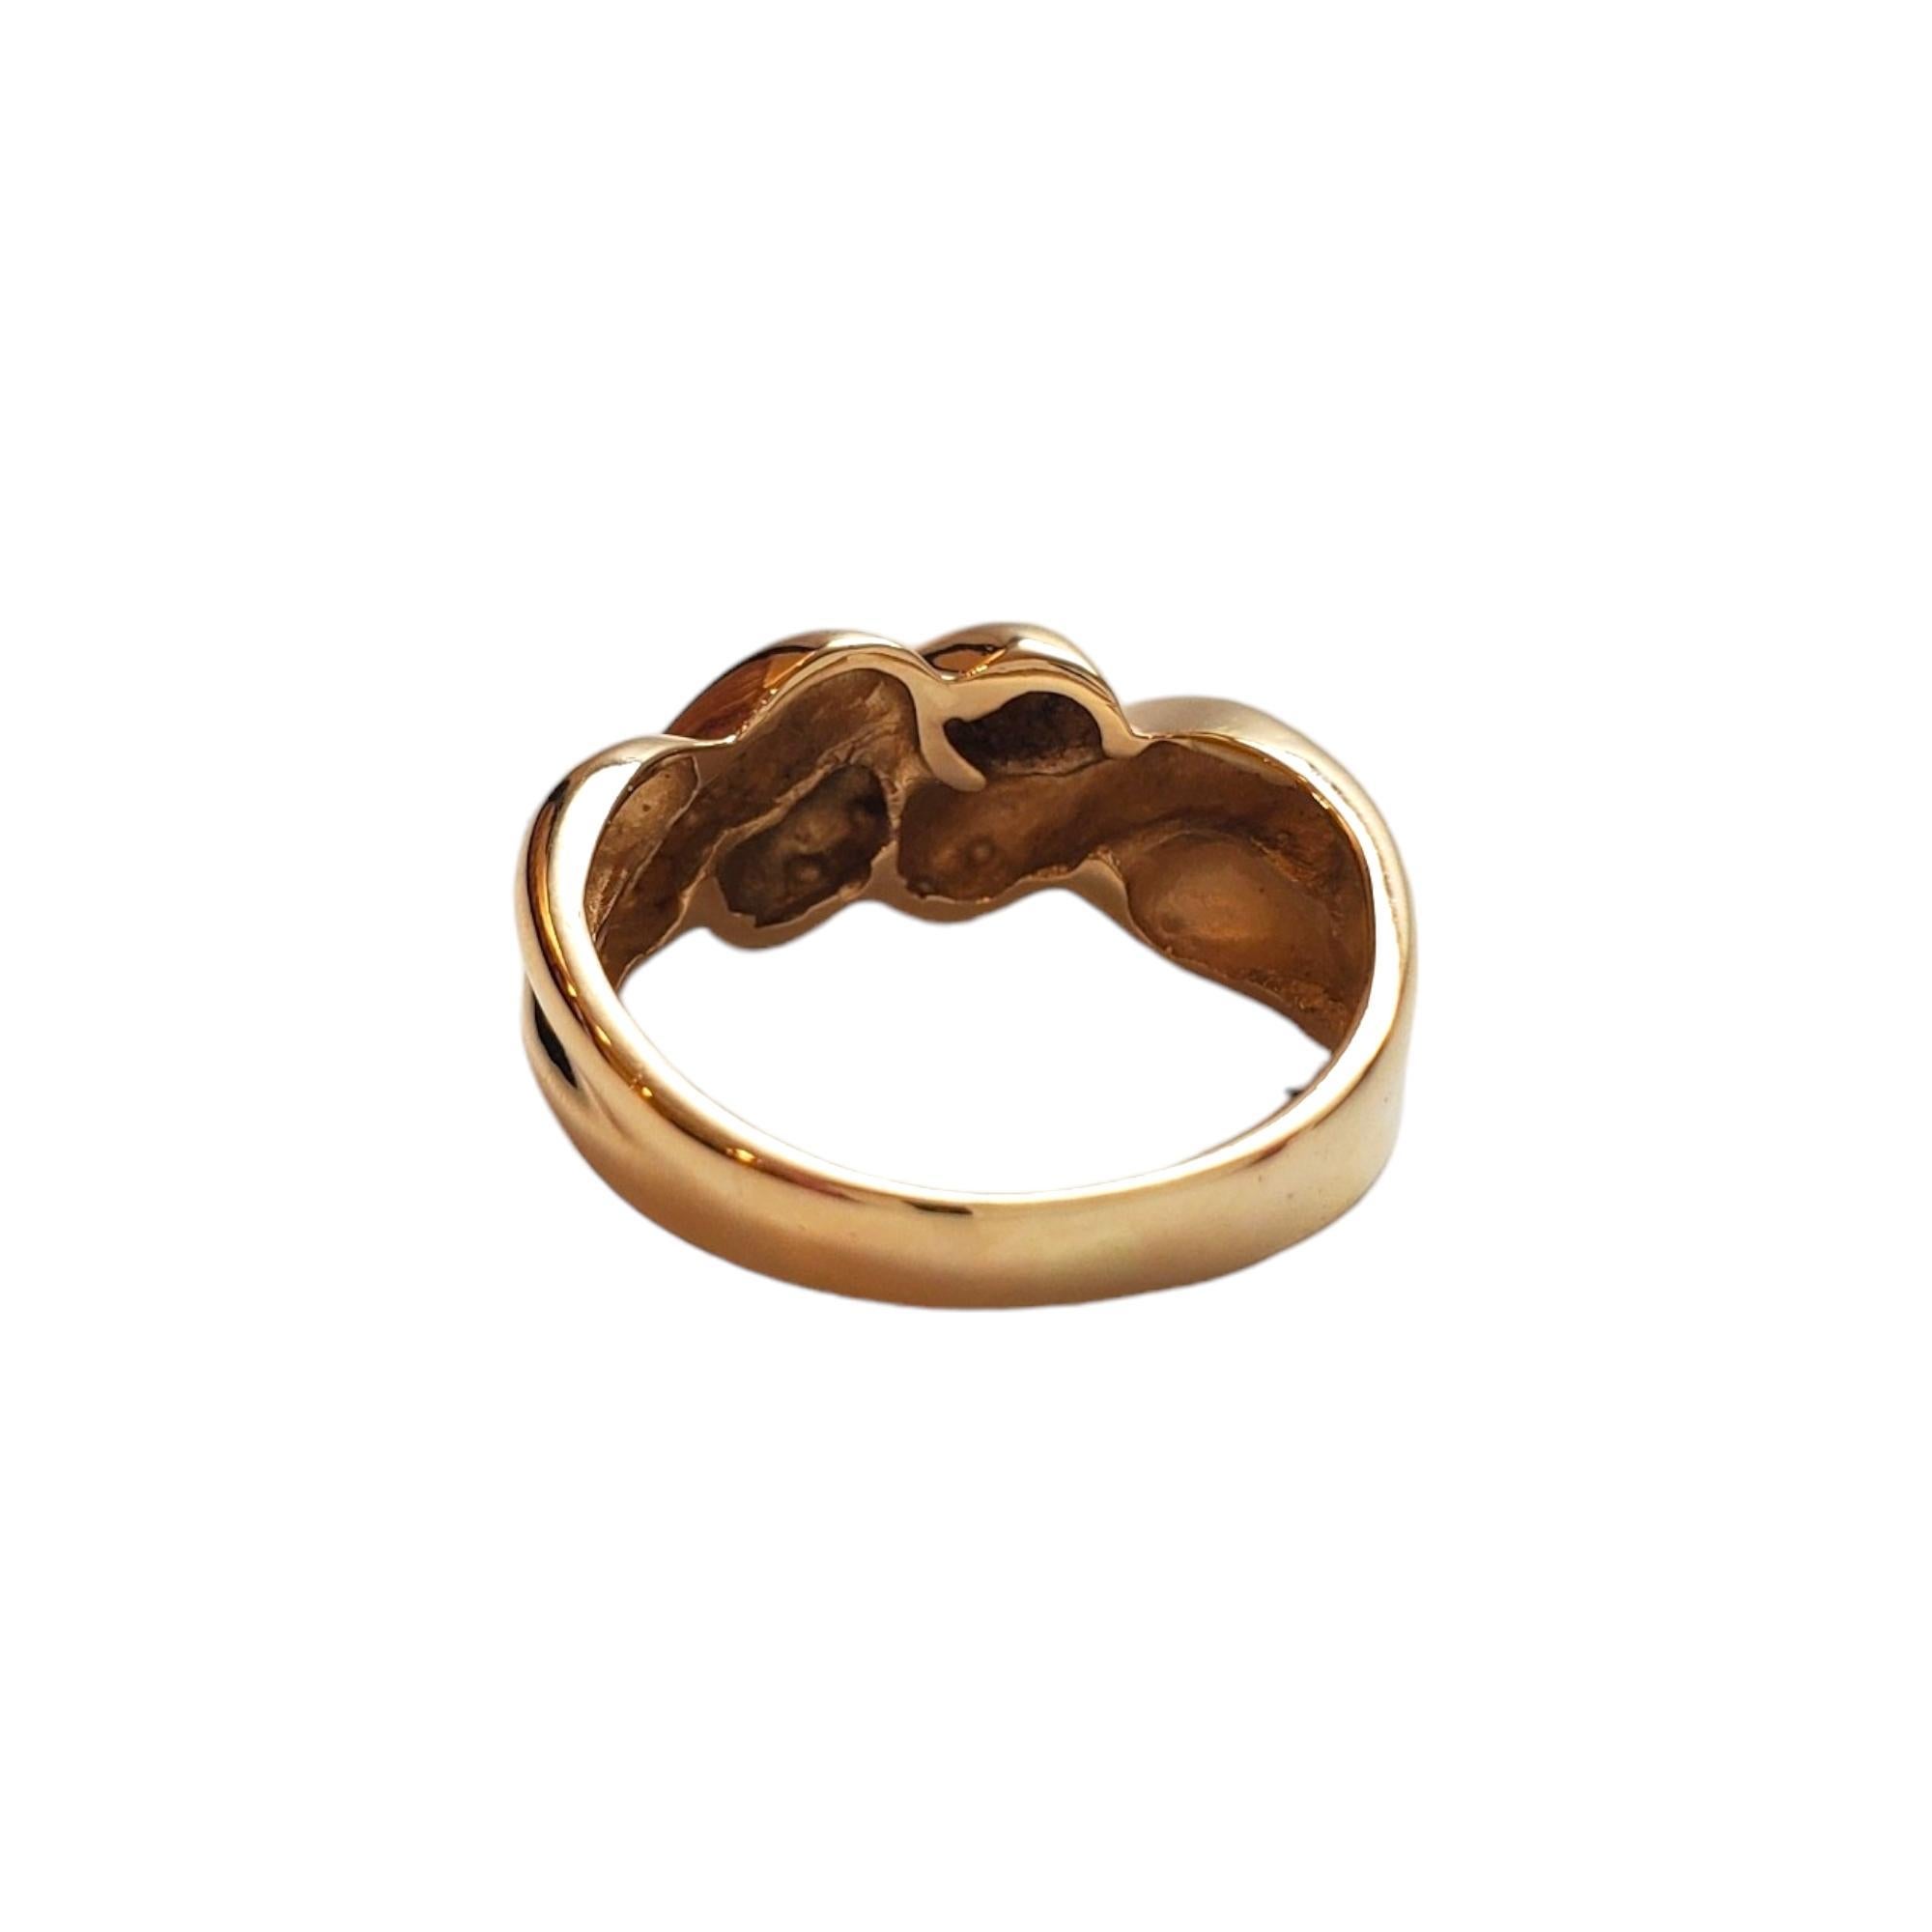 14K Yellow Gold Shrimp Ring

Elegant 14K yellow gold ring with shrimp design.

Hallmark: 14K

Weight: 4.2 g/ 2.7 dwt.

Ring Size: 6

Shank: 2.9 mm

Dimensions: 16.7 mm X 8.5 mm X 4.2 mm

Very good condition, professionally polished.

Will come